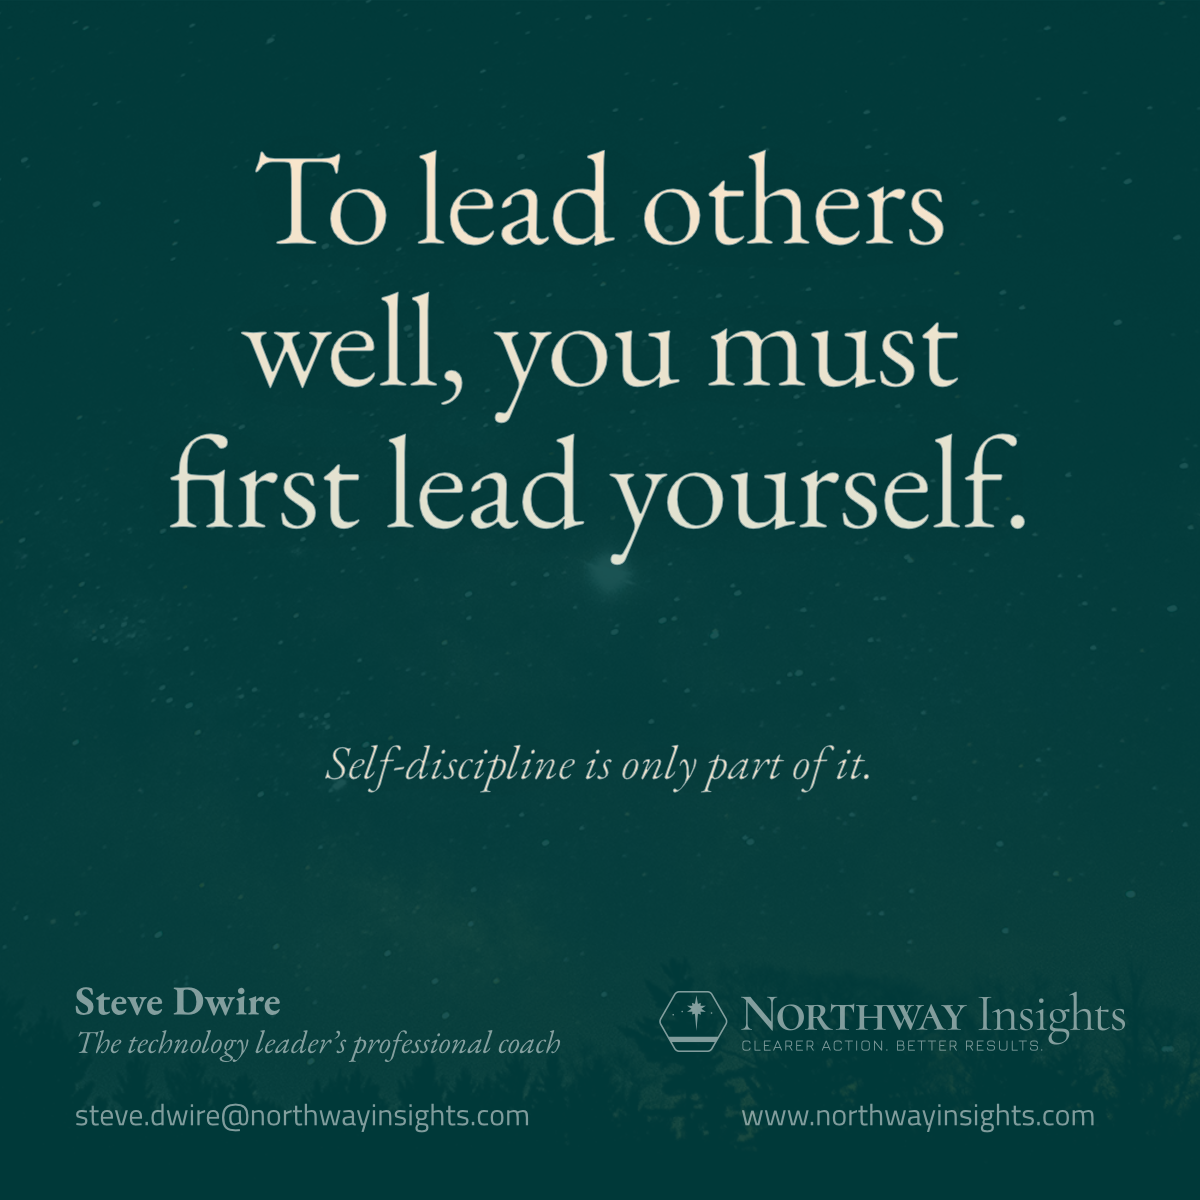 To lead others well, you must first lead yourself